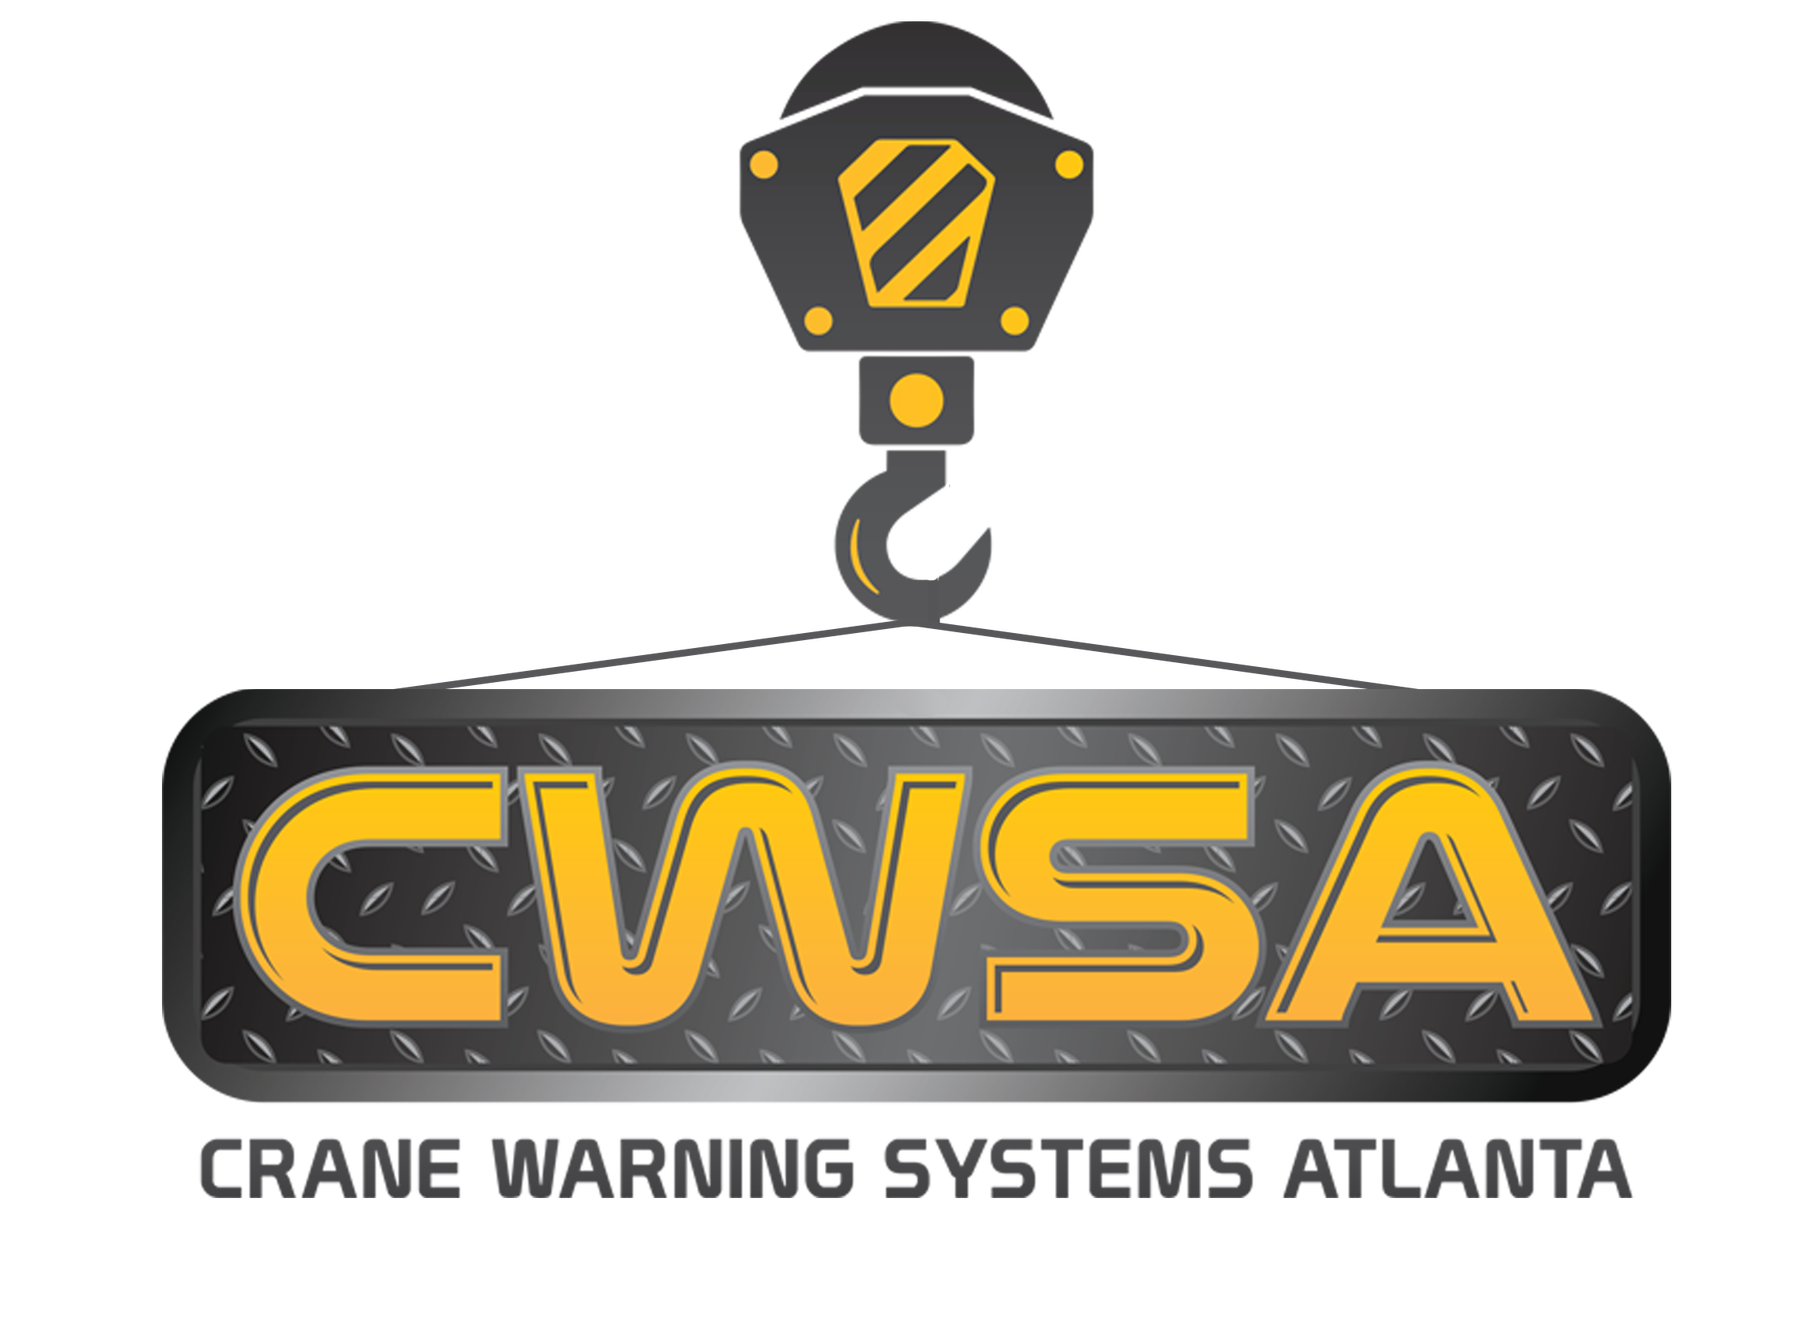 Crane Warning Systems Atlanta is a Leading Distributor of RaycoWylie Crane Safety Indicators